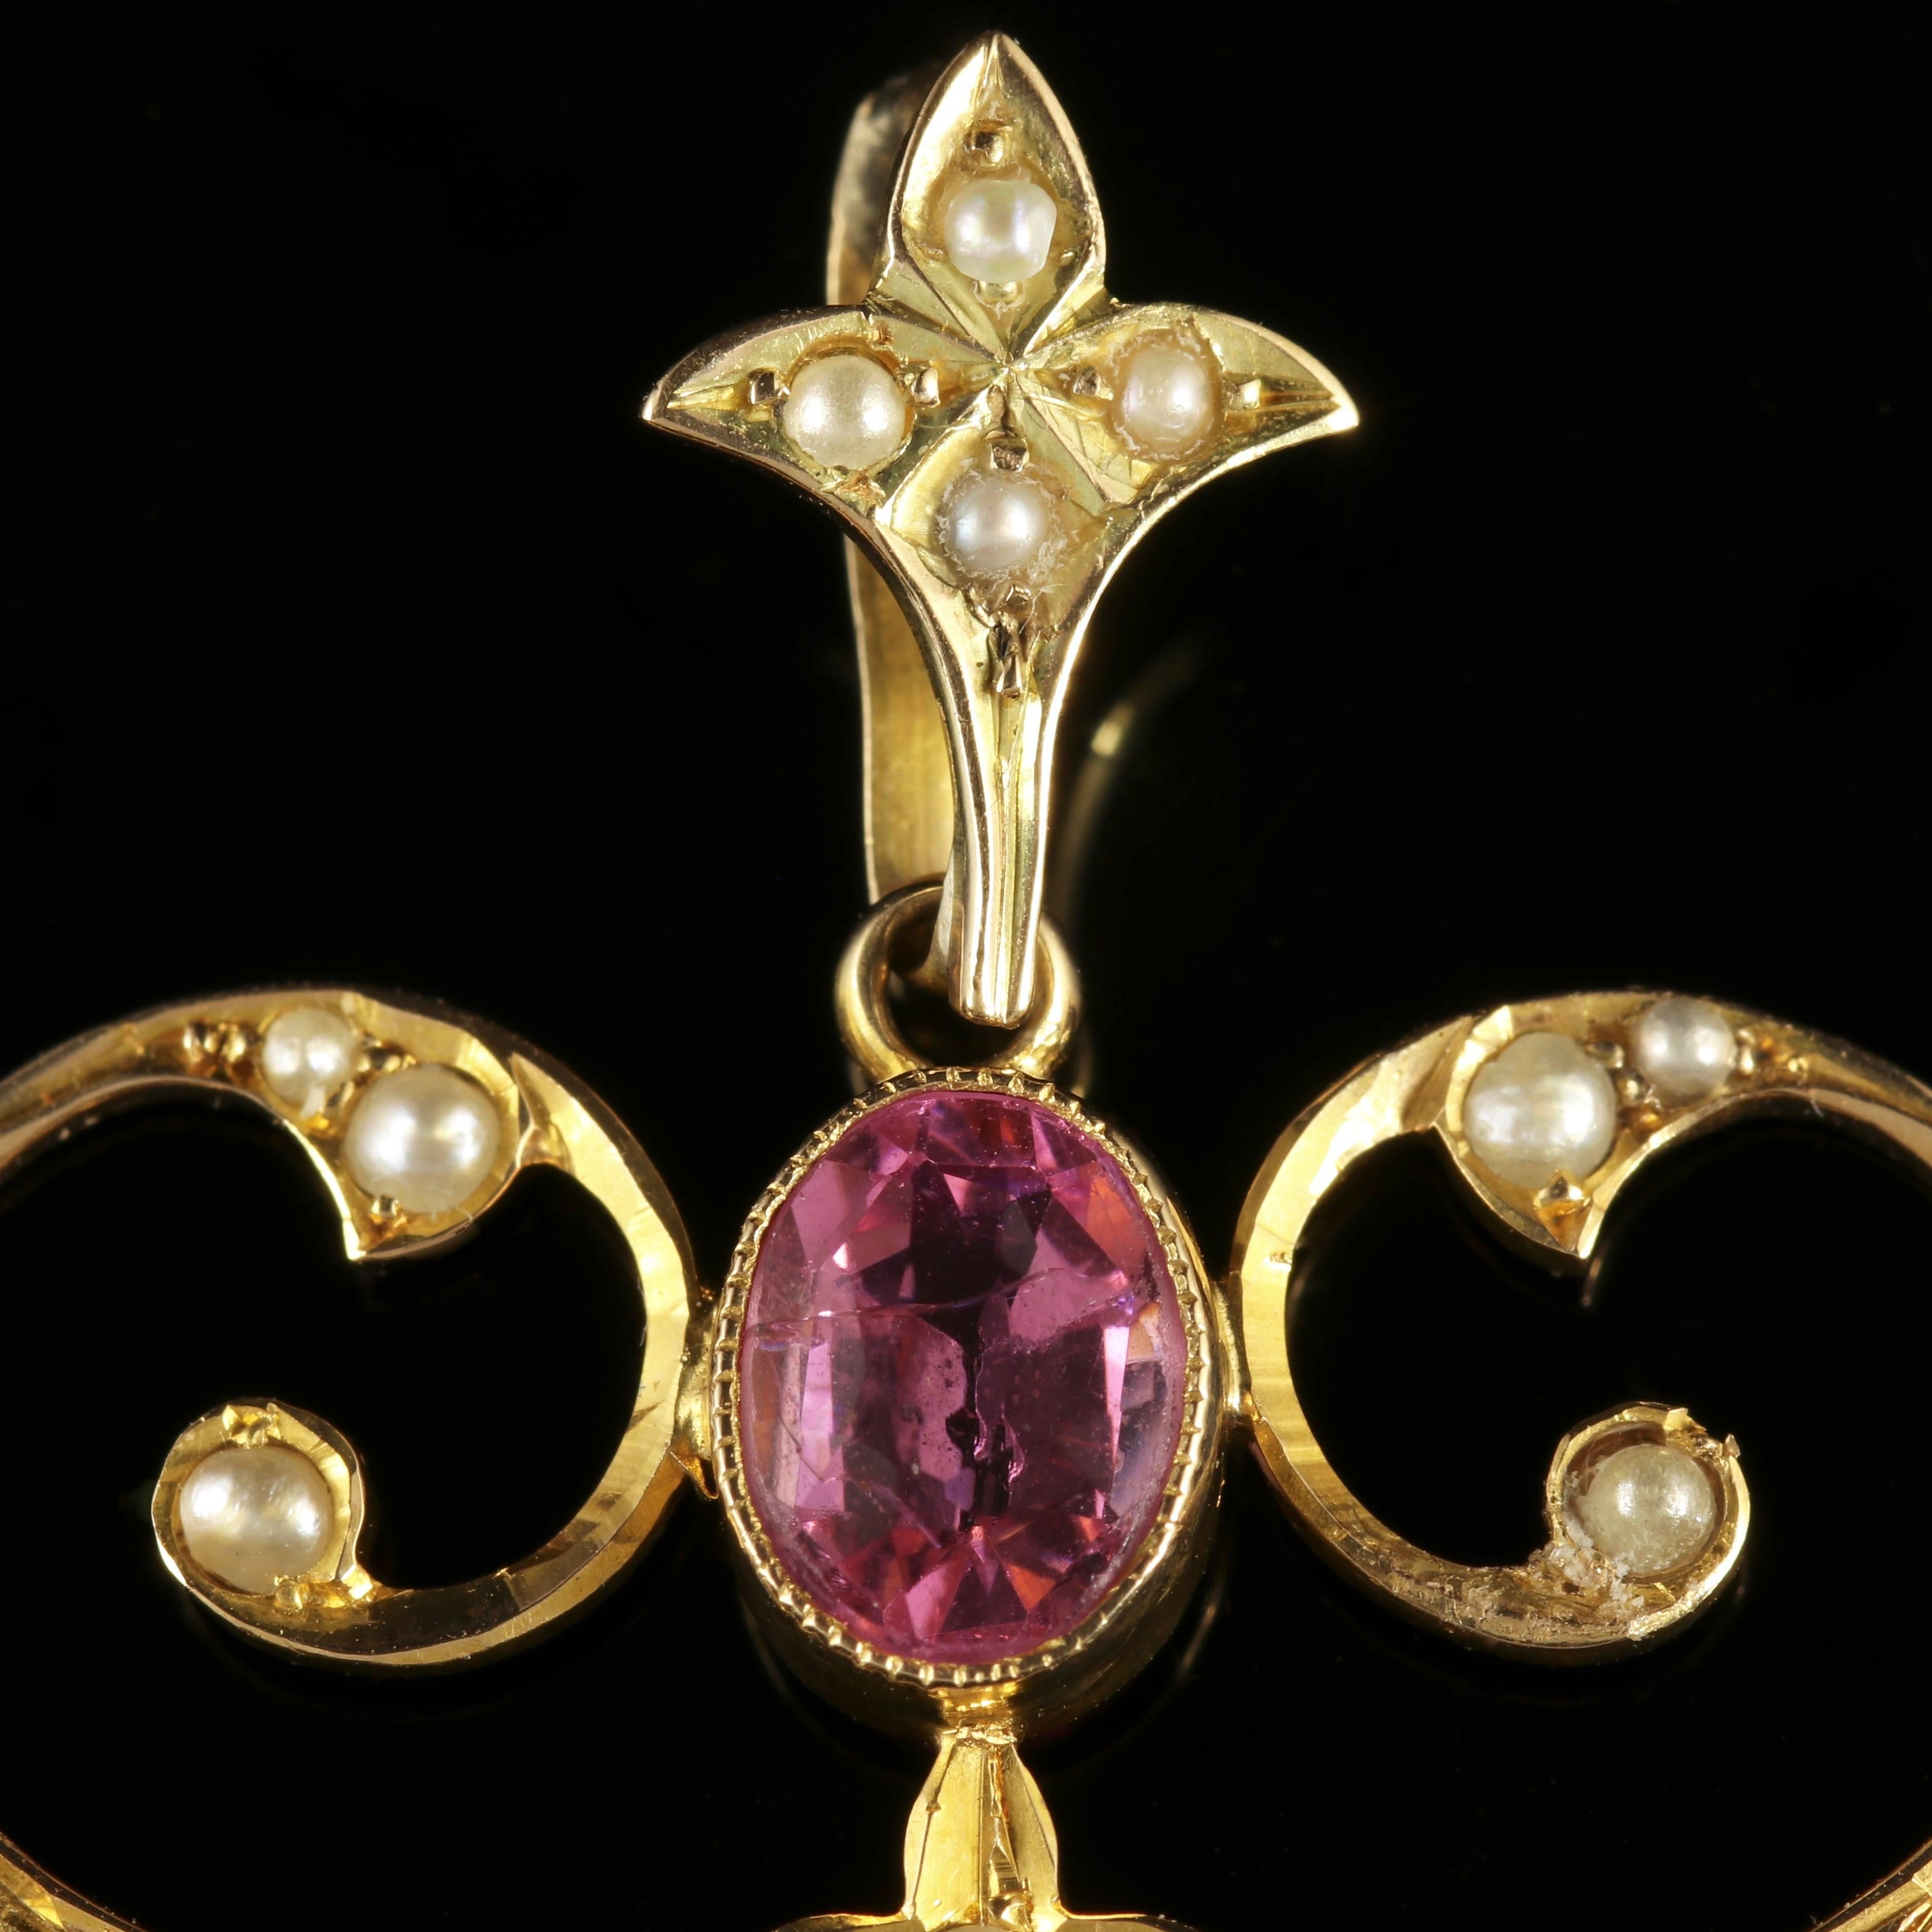 To read more please click continue reading below-

This stunning 15ct Yellow Gold pendant is genuine Victorian, Circa 1880.

Set with four beautiful rich pink Tourmalines and decorated with Pearls which compliment each other perfectly.

Pink